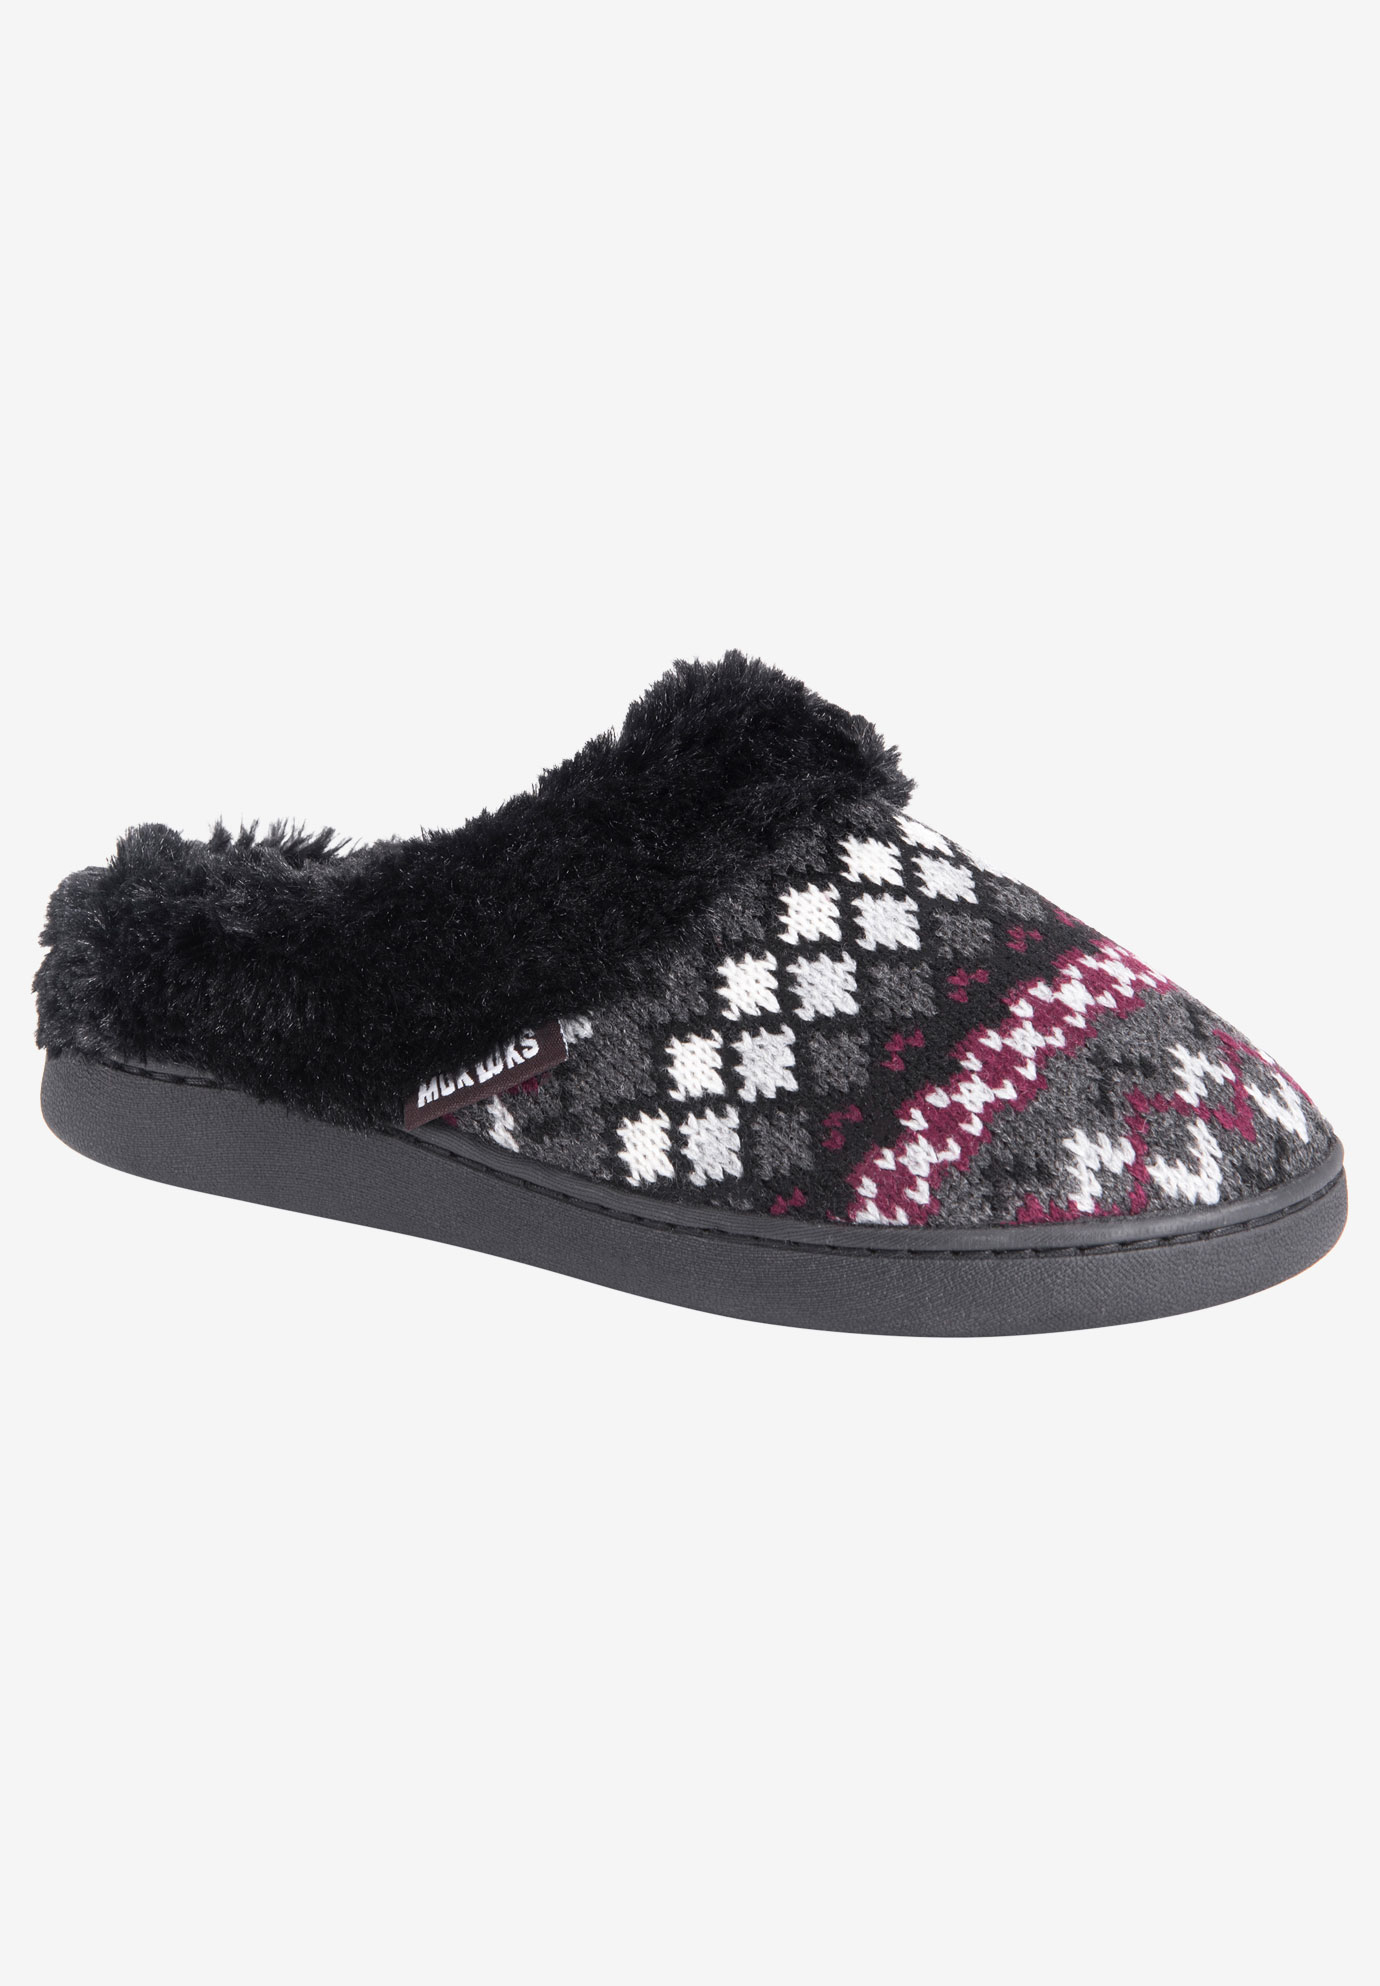 Suzanne Clog Slipper by Muk Luks| Plus Size Slippers | Woman Within